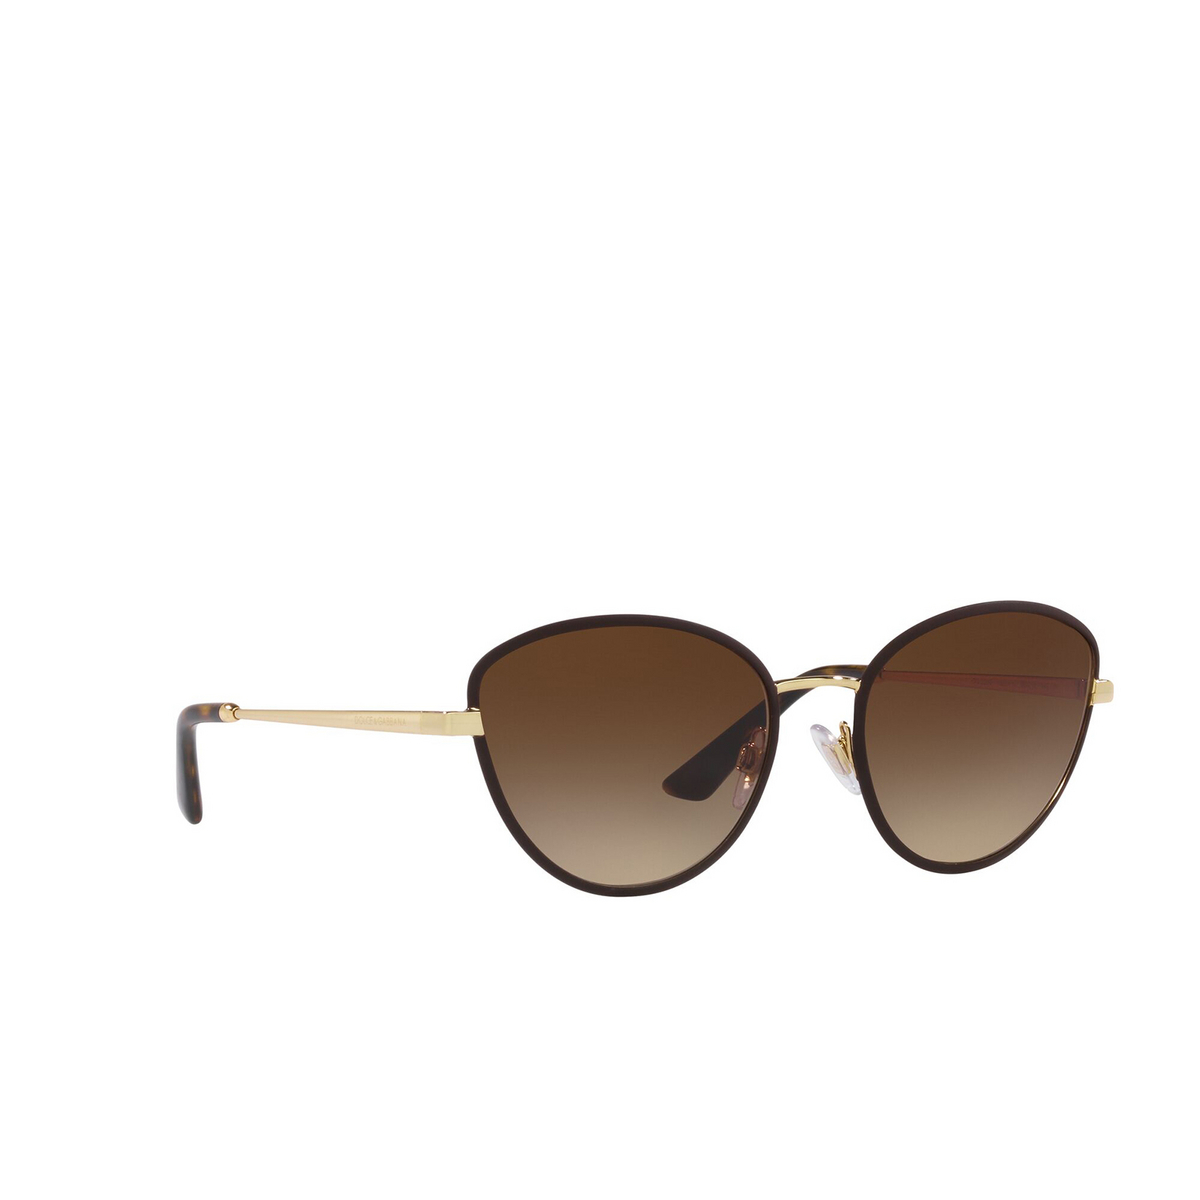 Dolce & Gabbana® Butterfly Sunglasses: DG2280 color Gold / Matte Brown 132013 - three-quarters view.